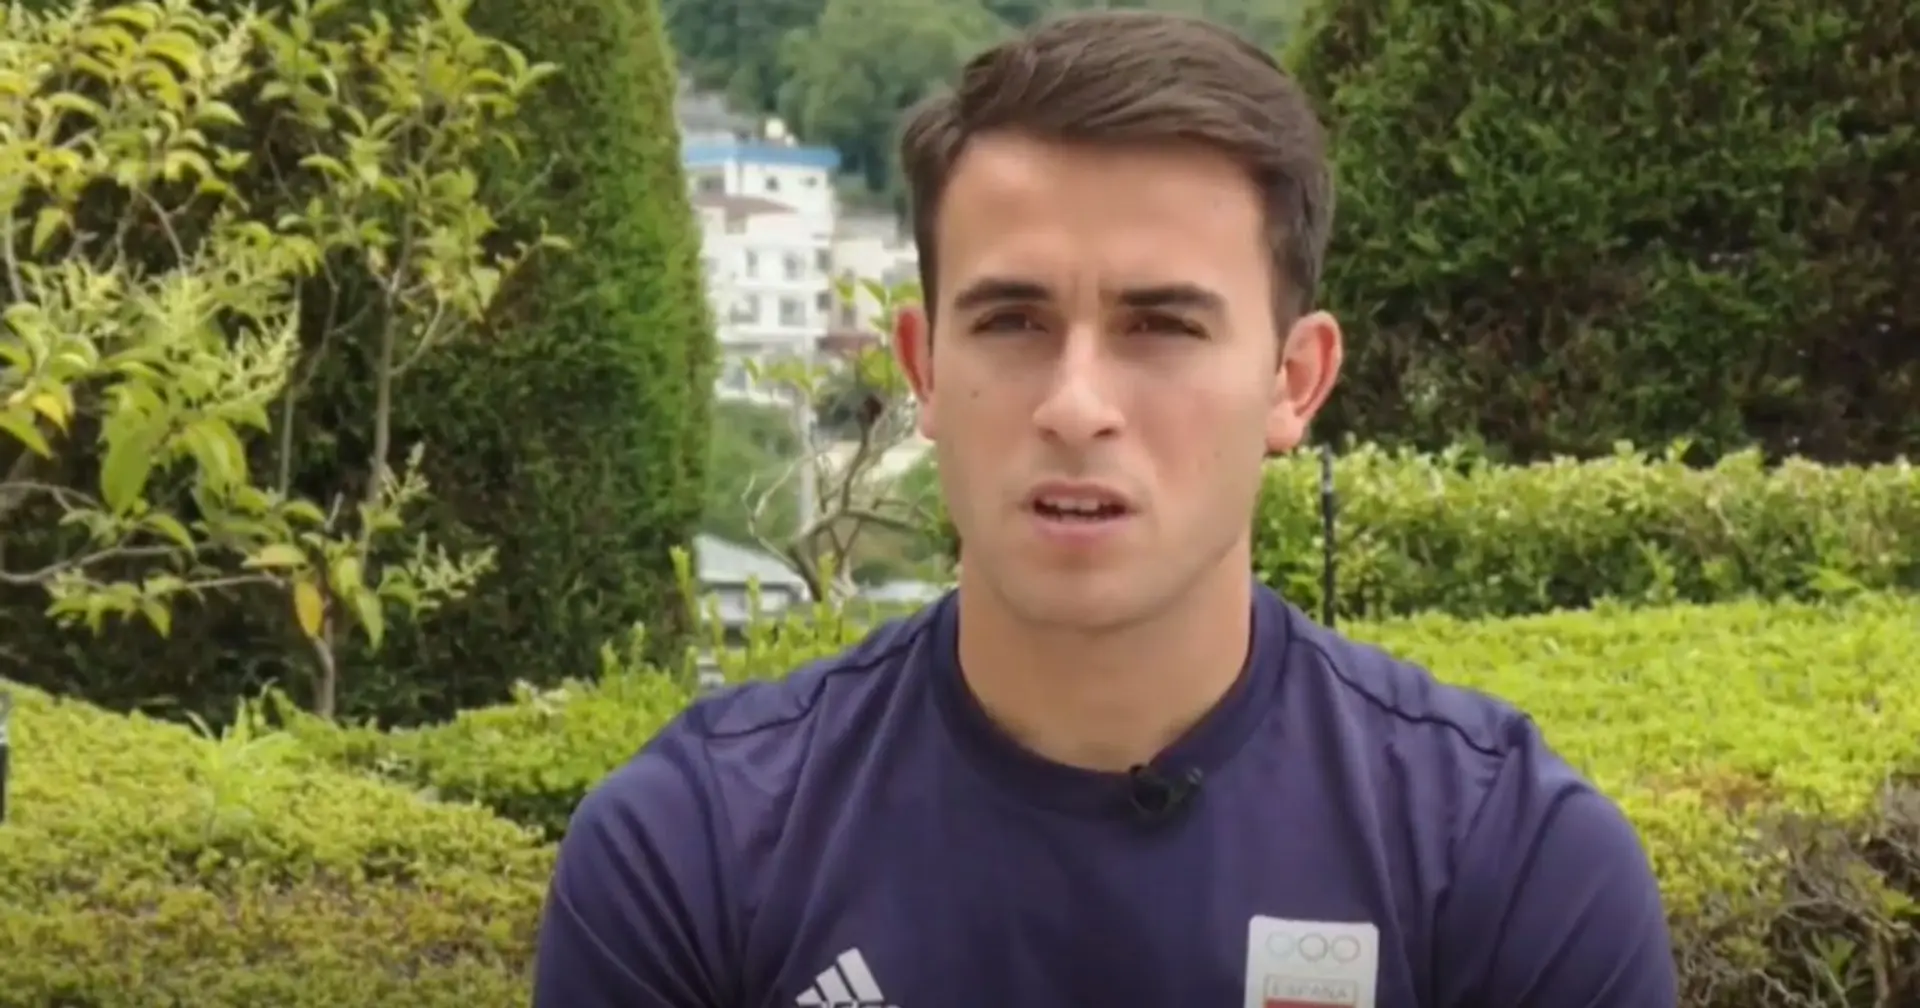 Eric Garcia aims for gold as he's set to represent Spain at Tokyo Olympics